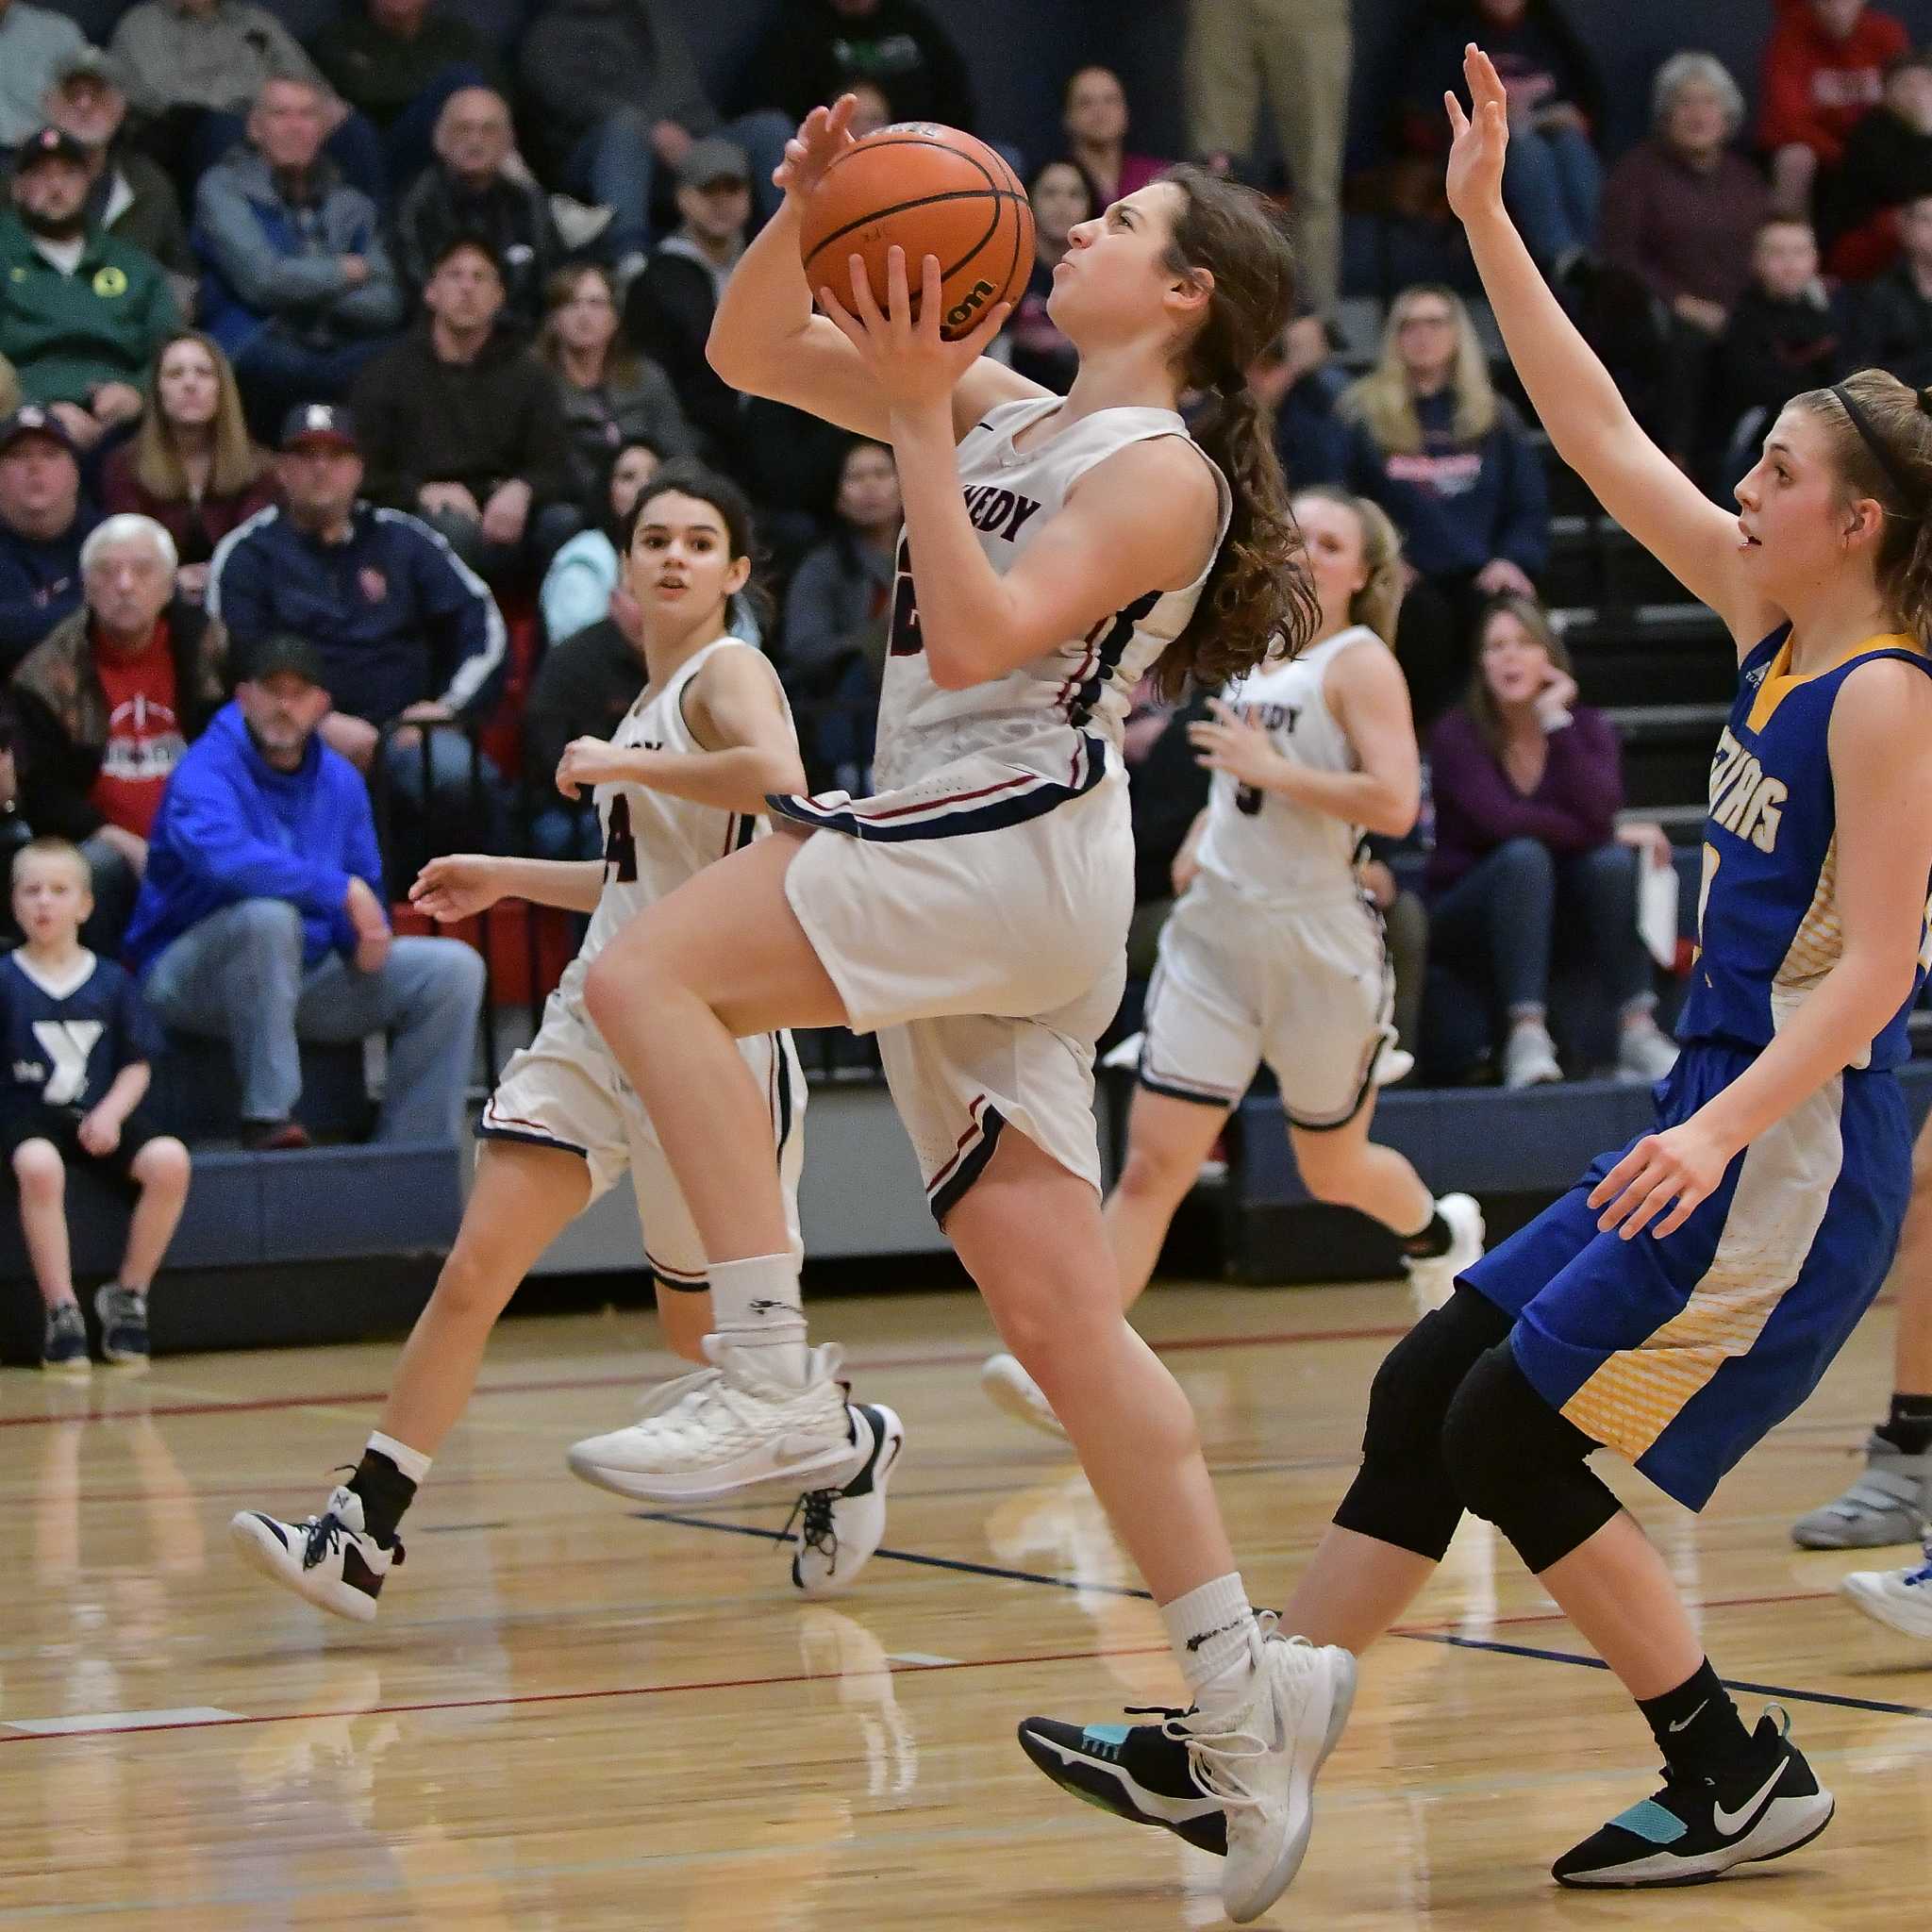 Kennedy's Ellie Cantu scored 13 points in Saturday's win over Gervais. (Photo by Andre Panse)